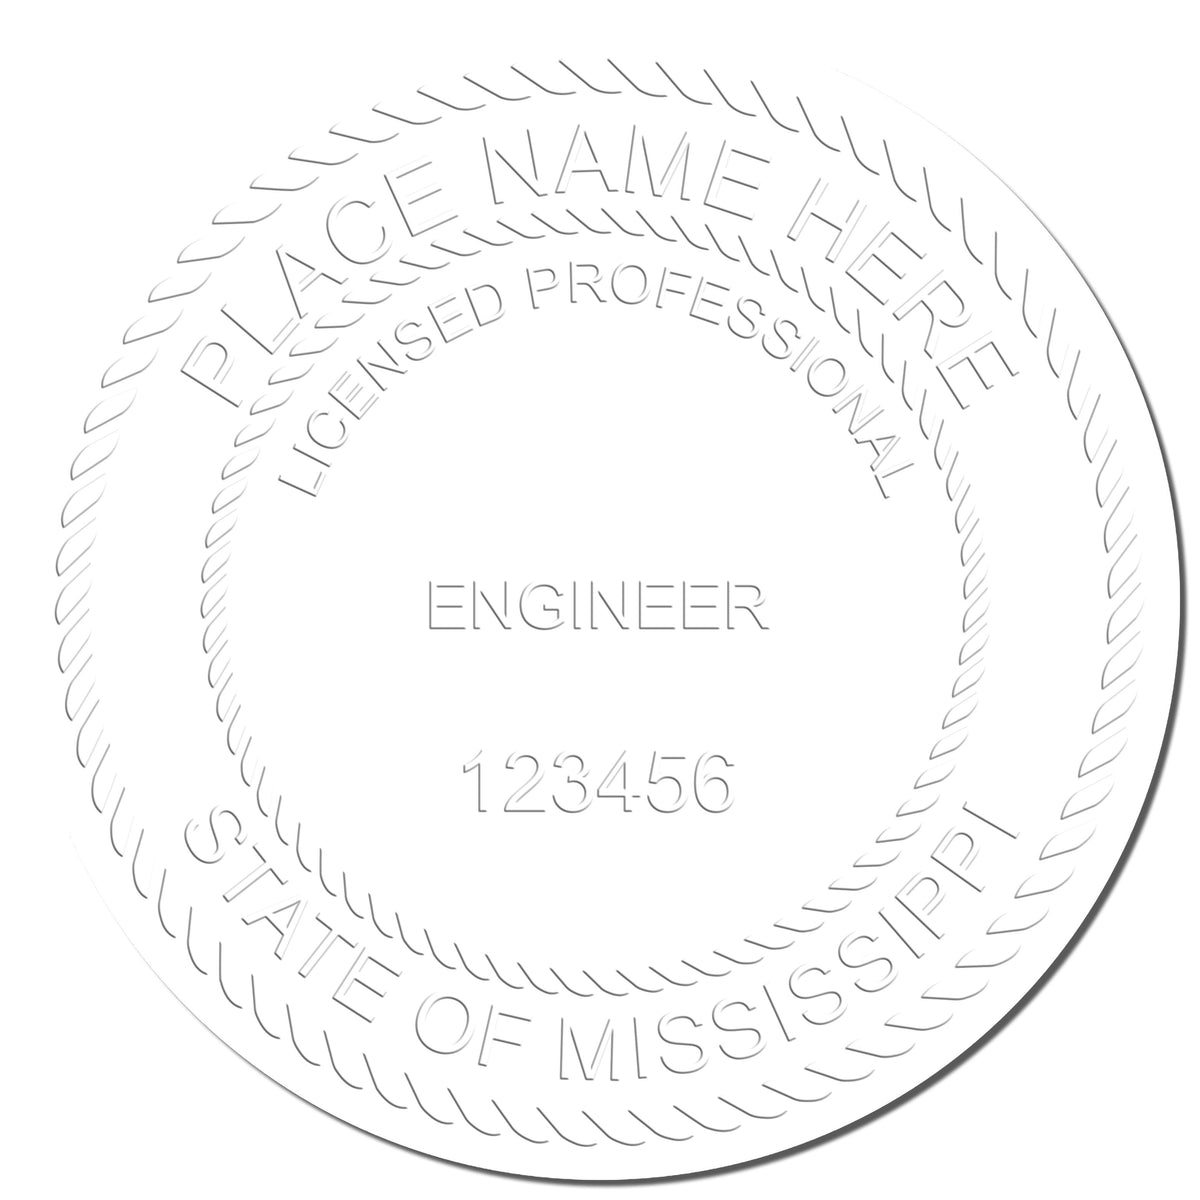 The Soft Mississippi Professional Engineer Seal stamp impression comes to life with a crisp, detailed photo on paper - showcasing true professional quality.